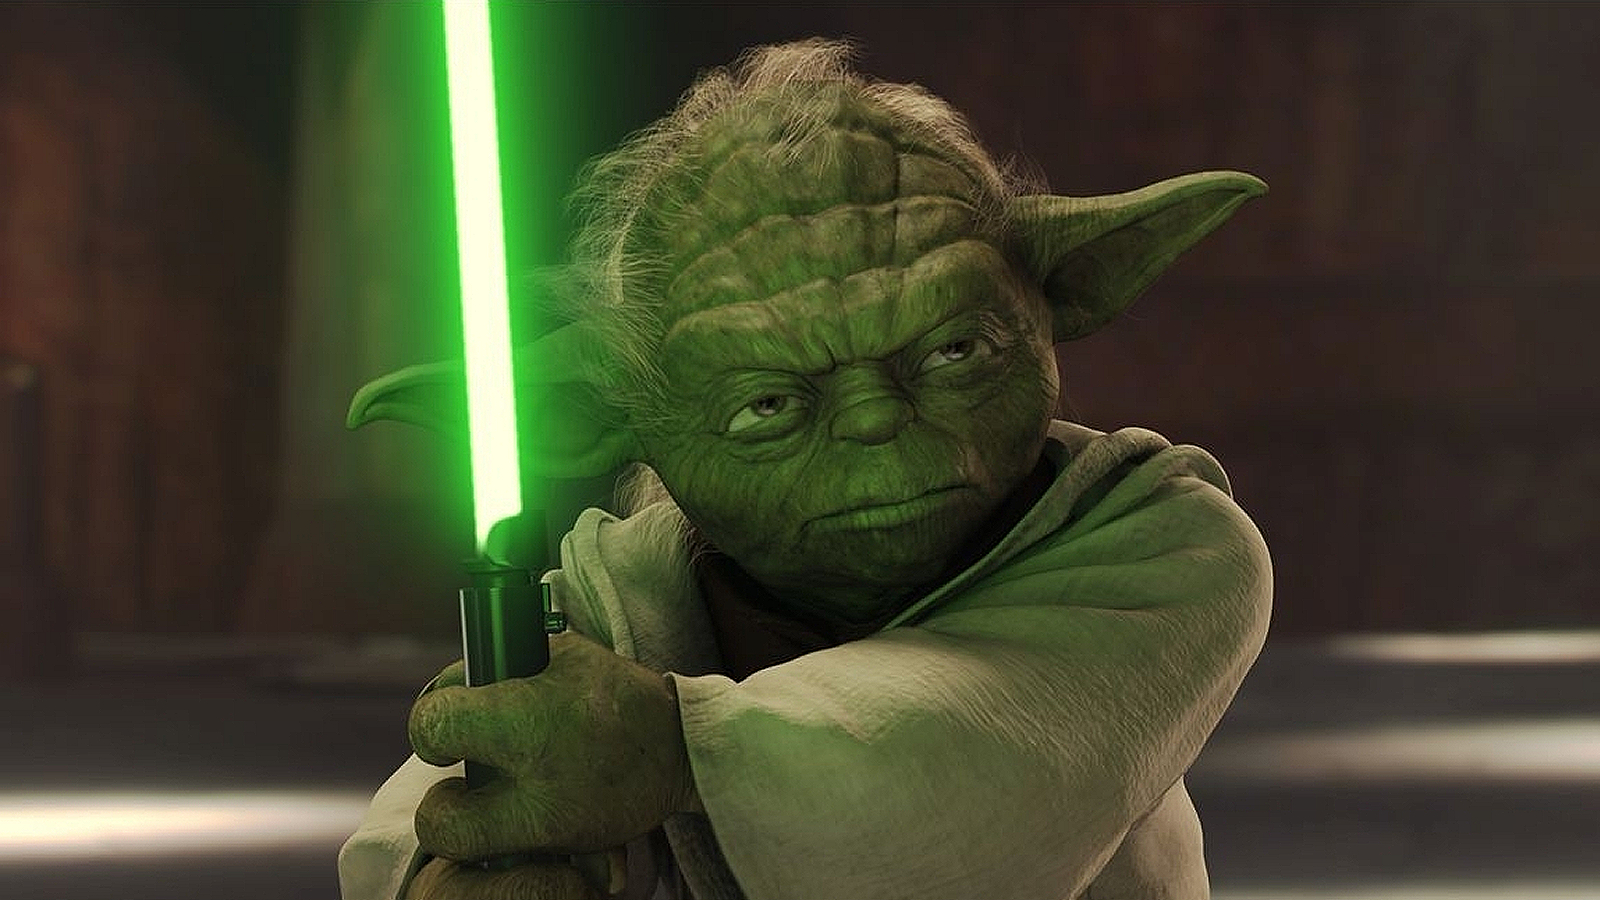 Yoda brandishing his lightsaber in Star Wars: Attack of the Clones